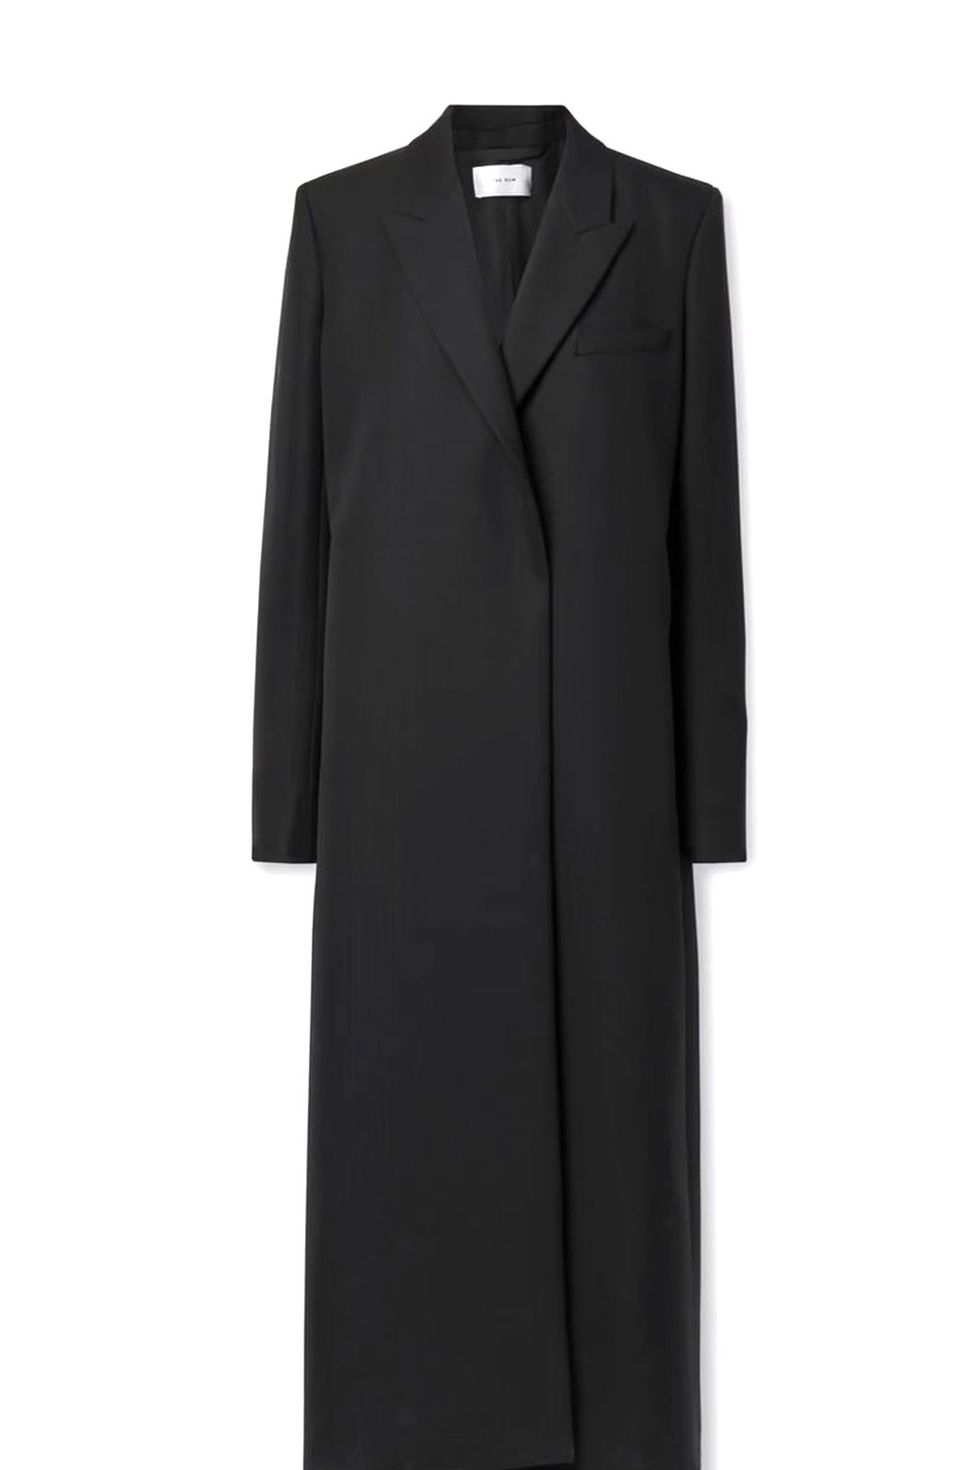 15 perfect black coats to invest in this winter